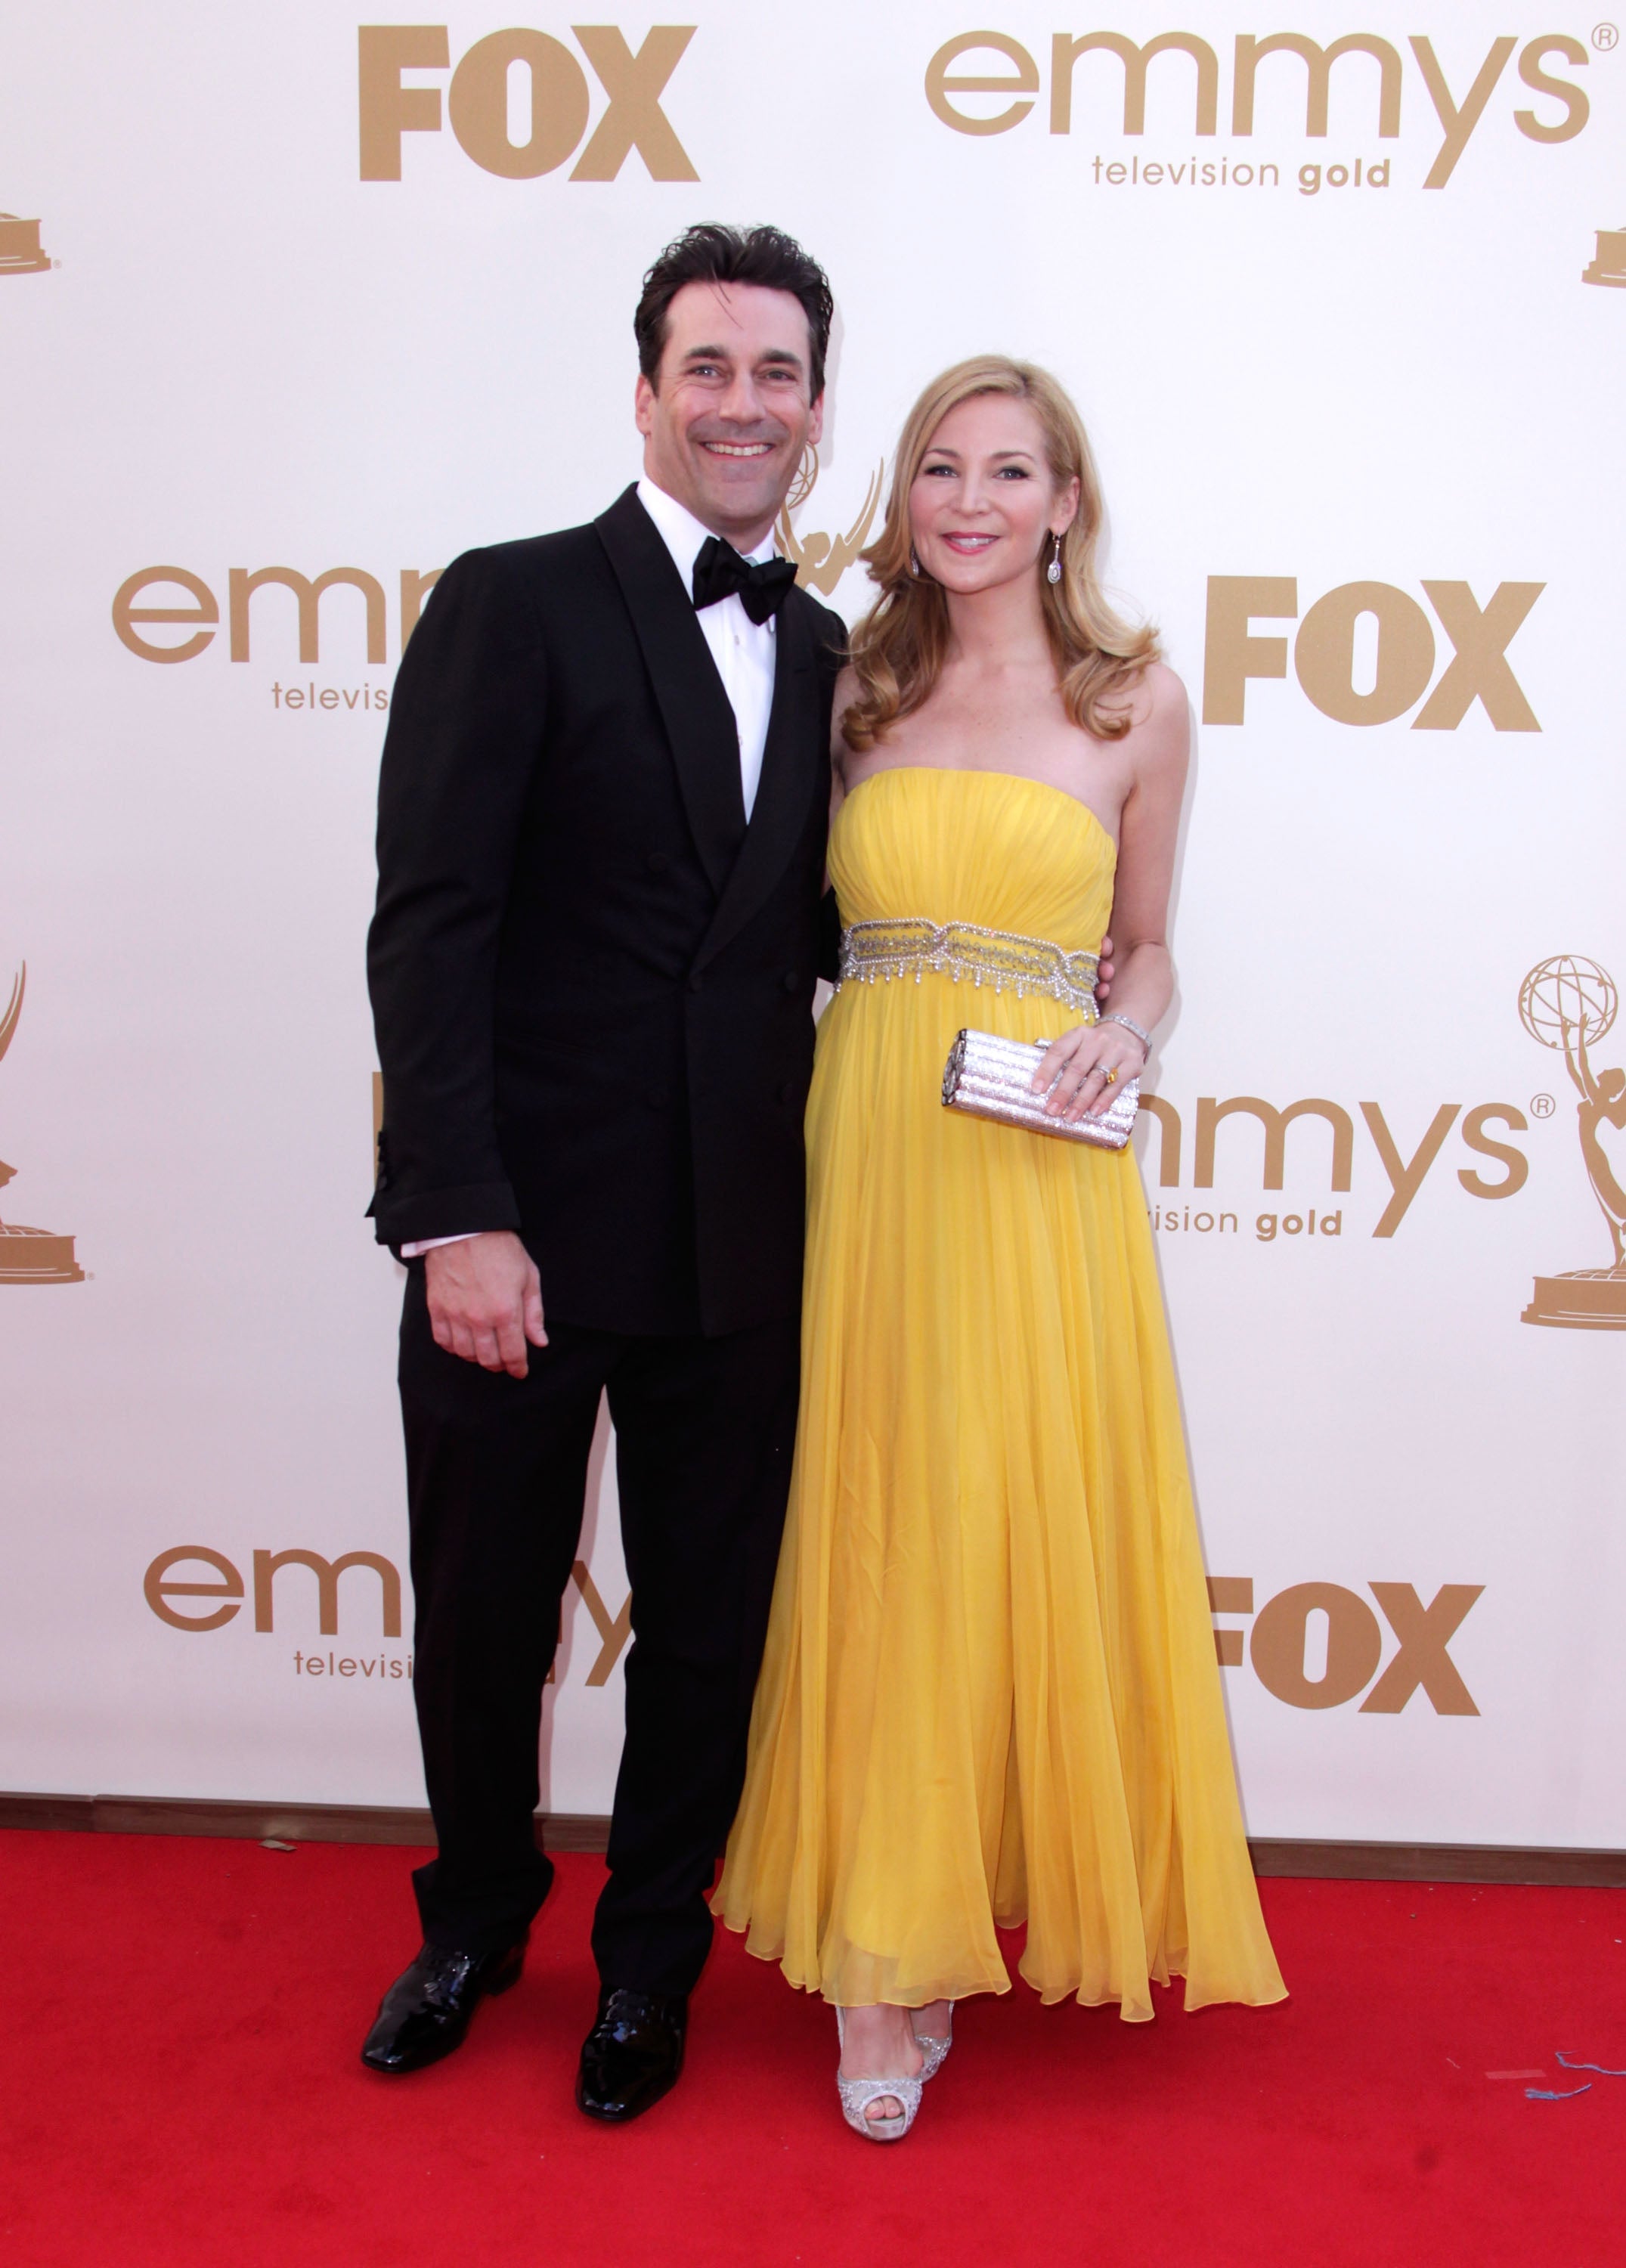 A-List Couples Glam Up at Last Year's Emmys | Entertainment Tonight2151 x 3000